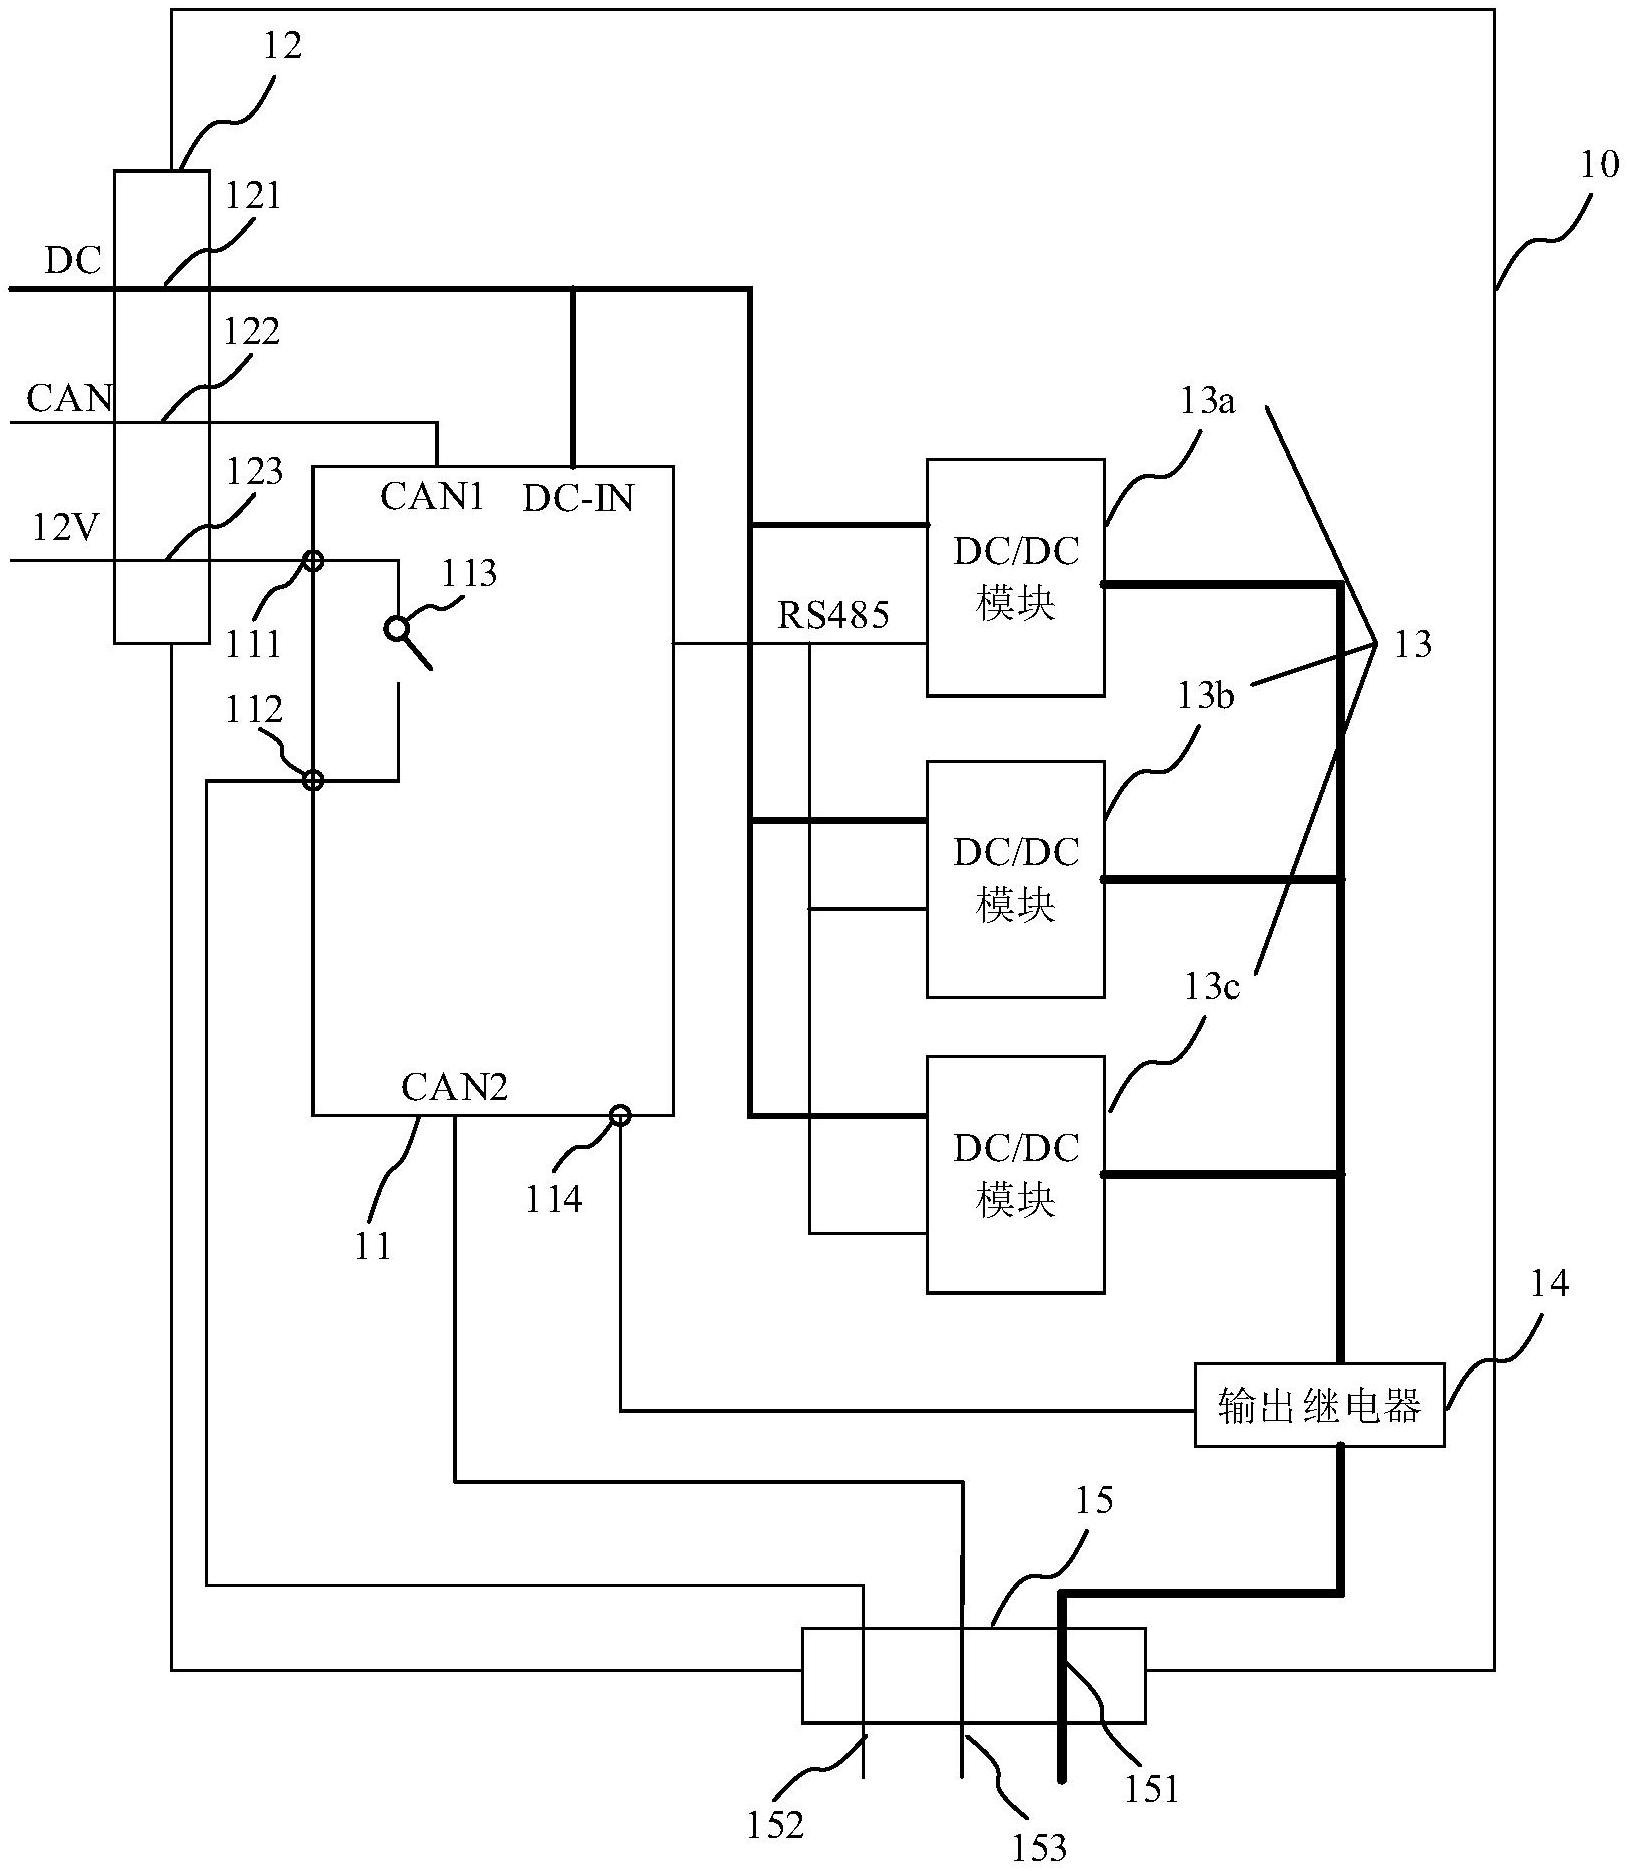 Greenworks has obtained utility model patent authorization: 